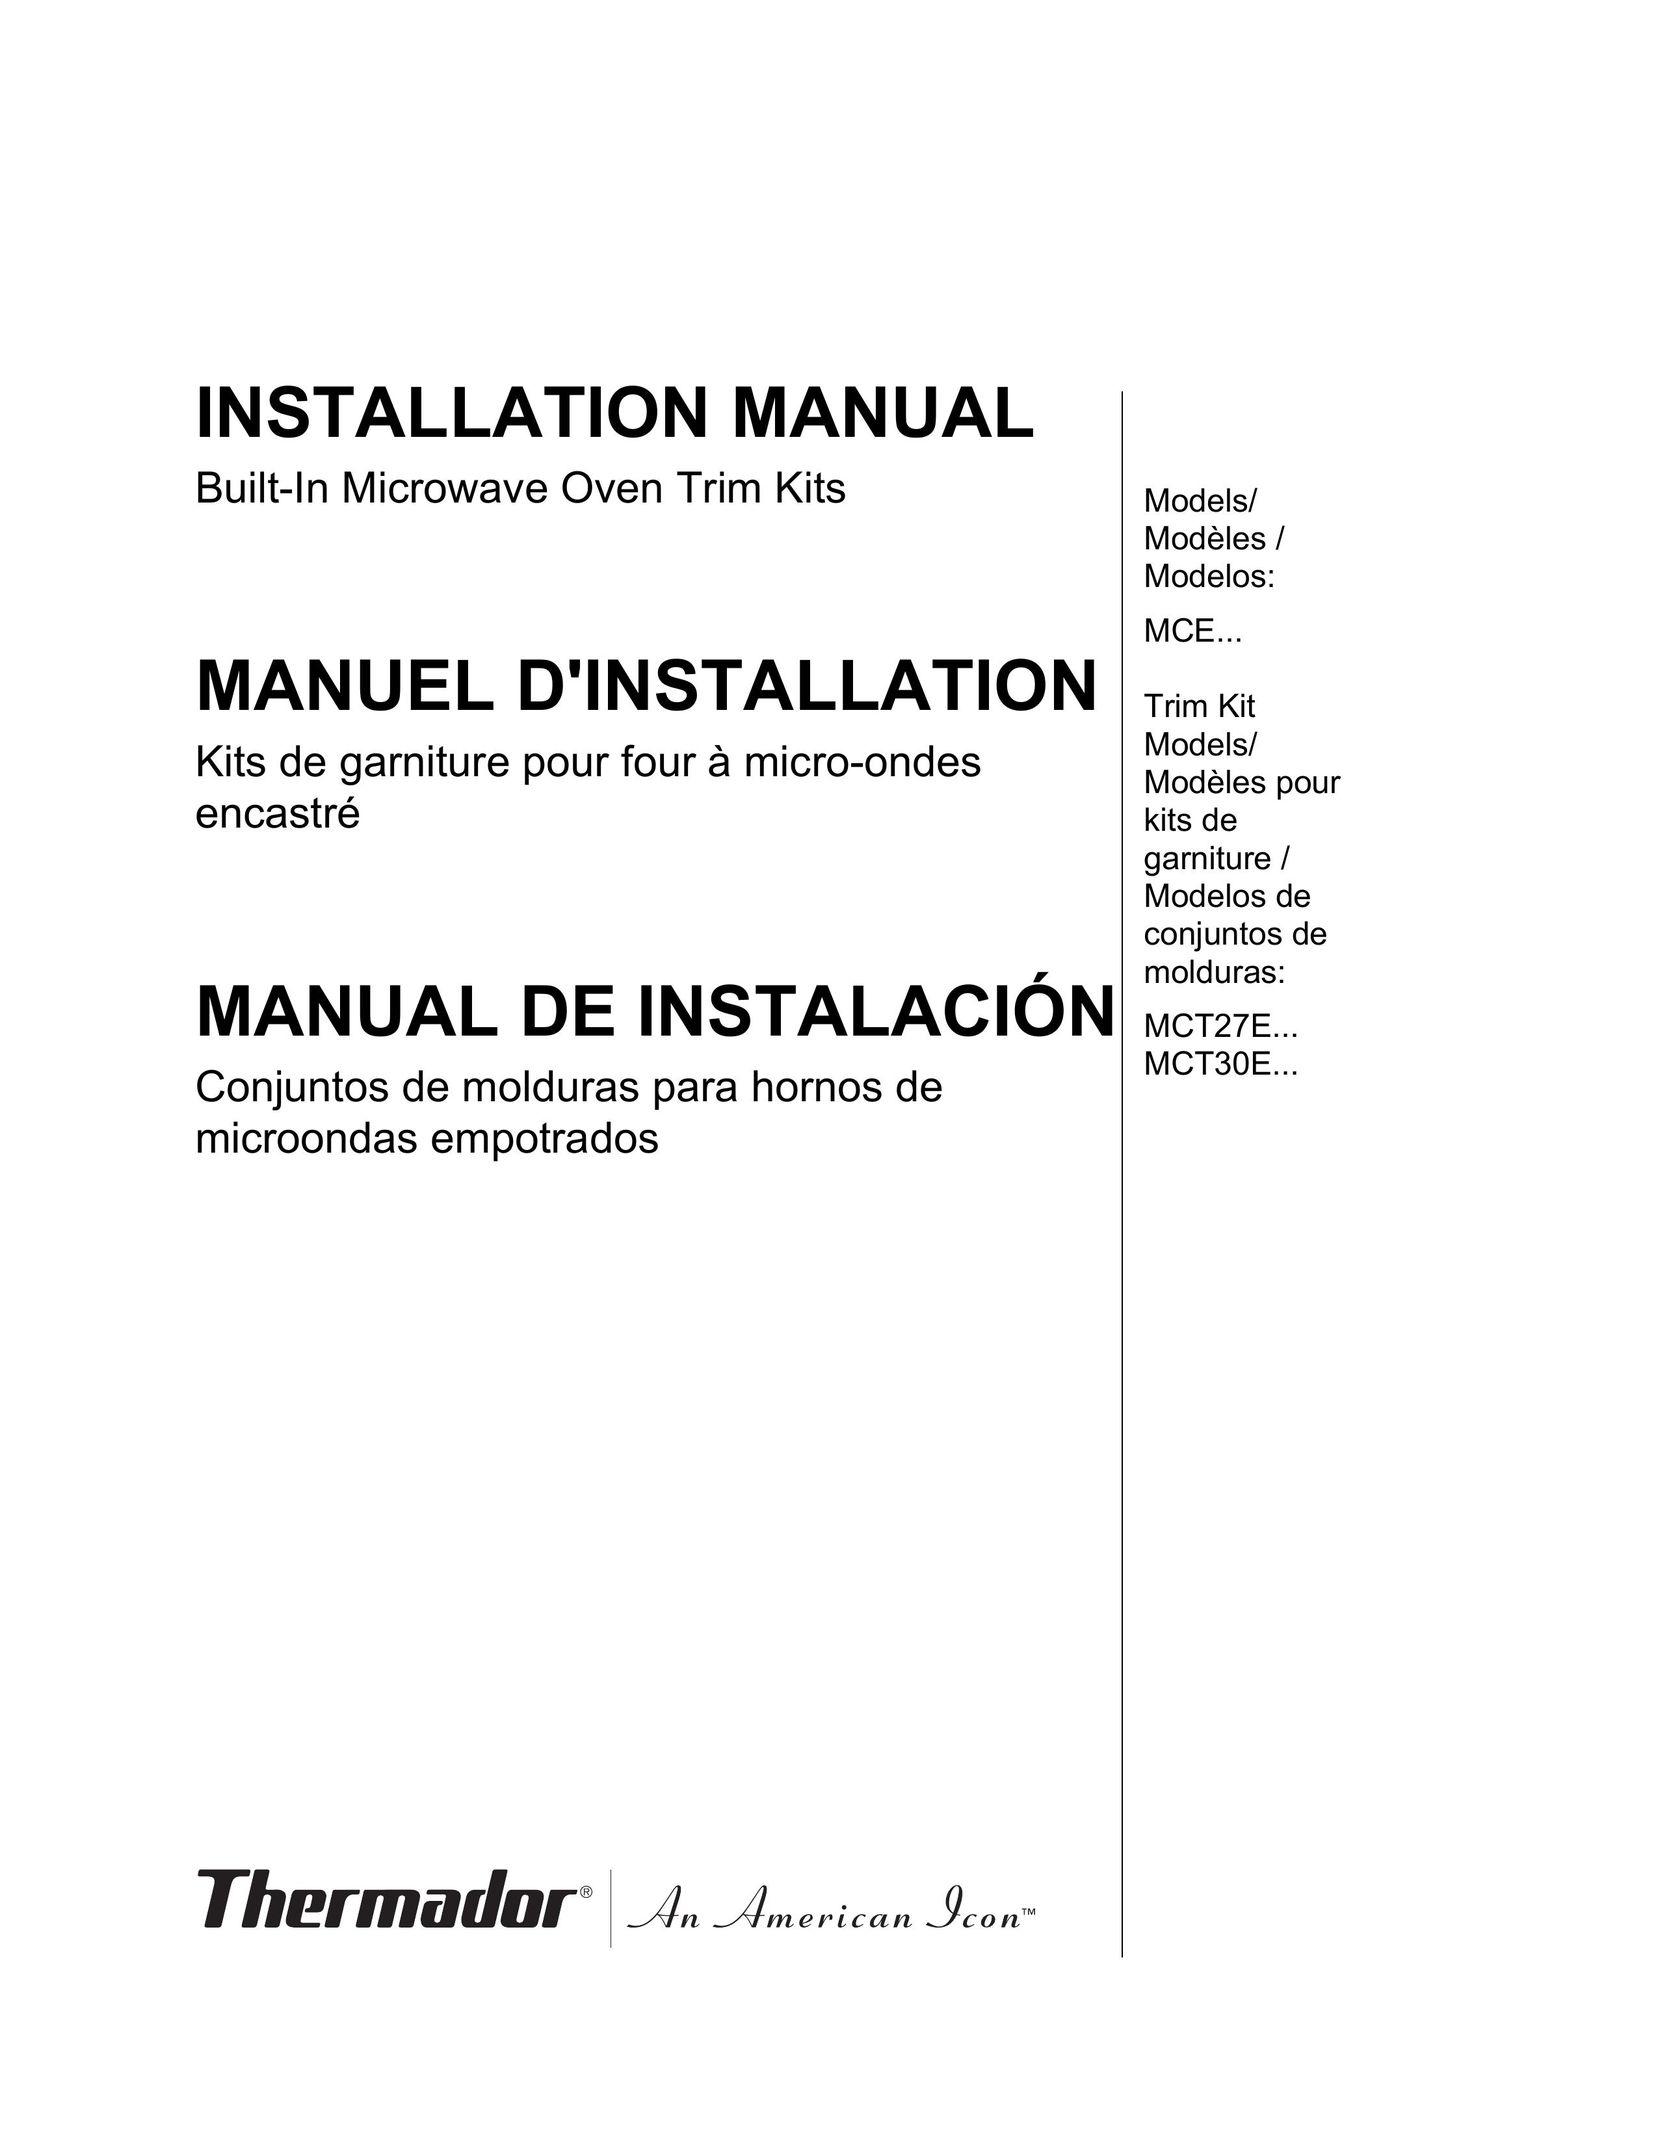 Thermador MCT30E Microwave Oven User Manual